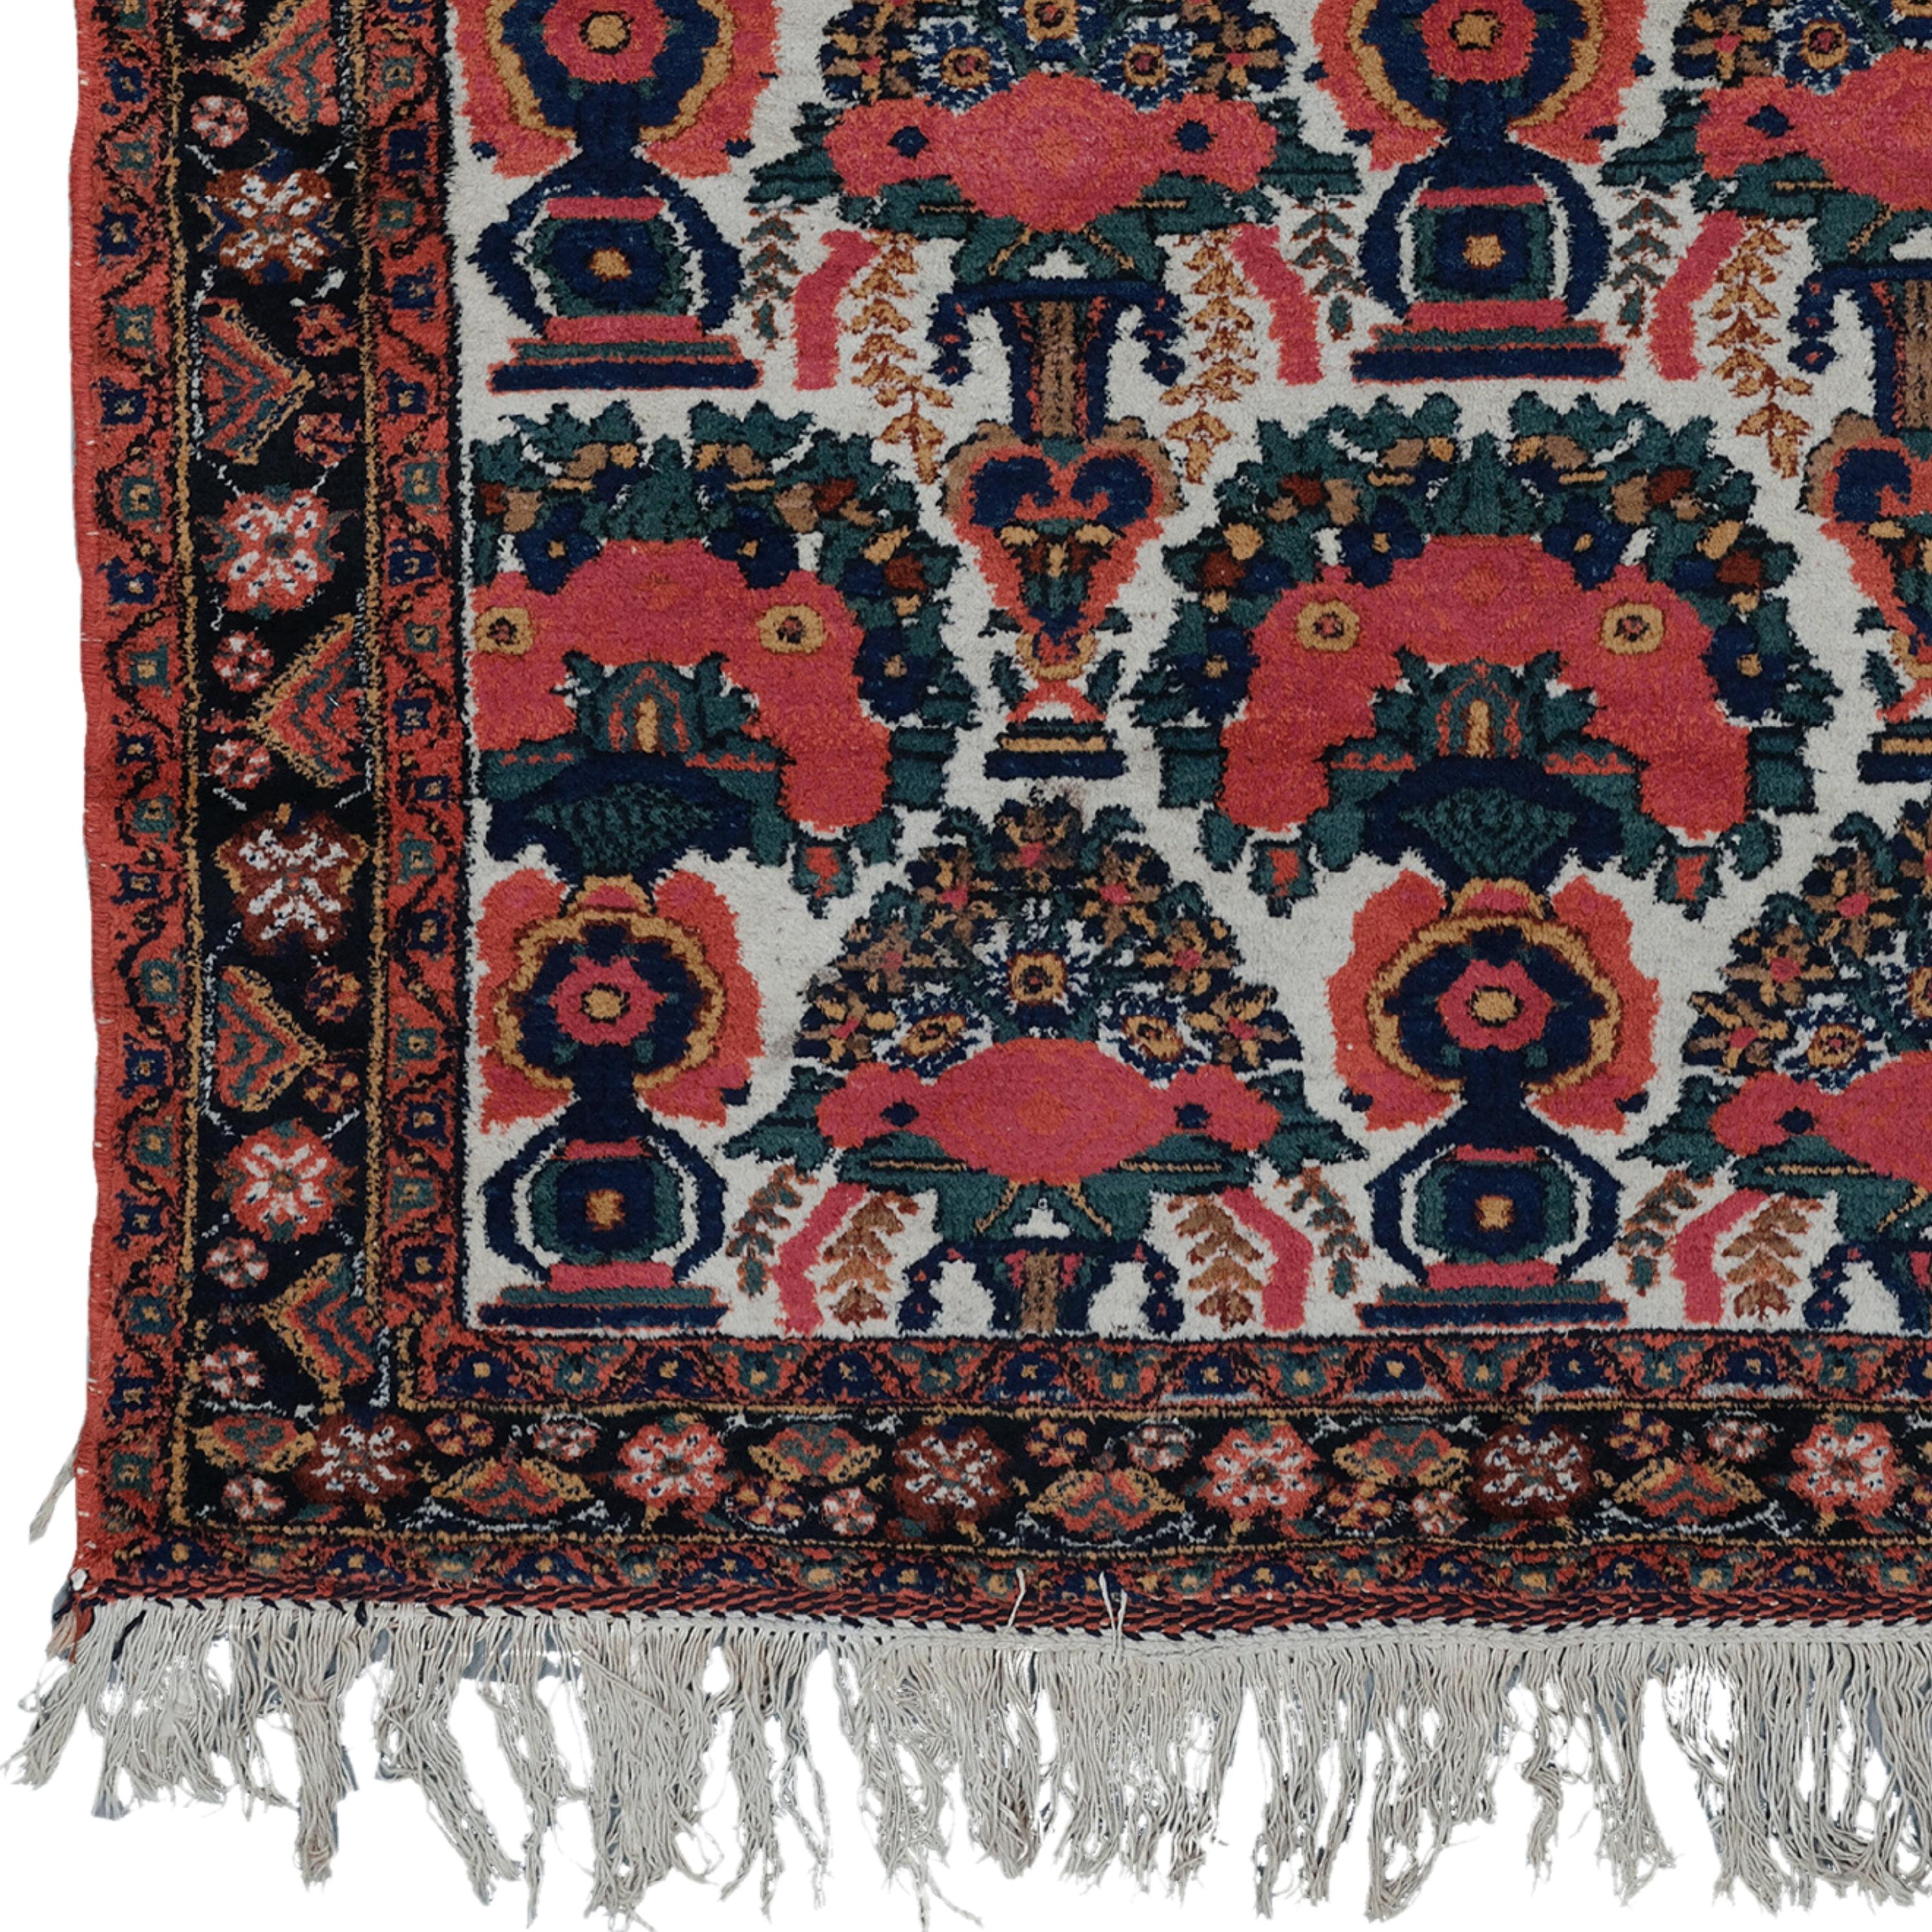 This exquisite 19th-century Afshar carpet is an example of the most exquisite craftsmanship of its period. It adds nobility to any space with its rich history and sophisticated design. Vibrant red and golden motifs embroidered on a dark blue